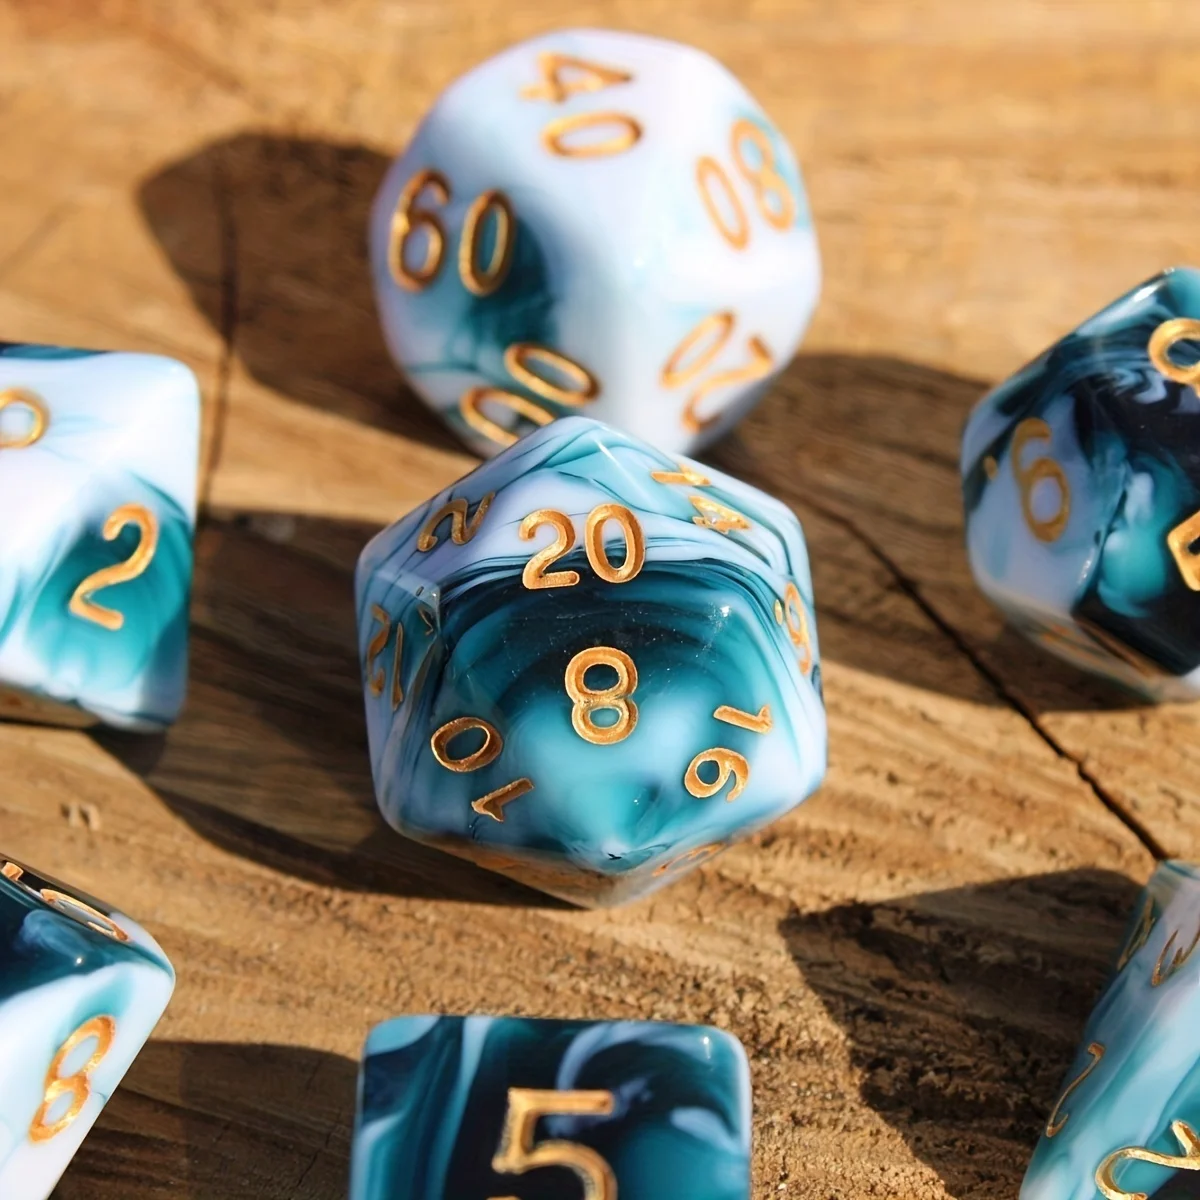 7Pcs/Set Blueberry Marble Dice for DND Dungeons and Dragons Table Games D&D RPG Tabletop Roleplaying 7pcs dragon hollow metal dnd dice set dnd 7pcs d